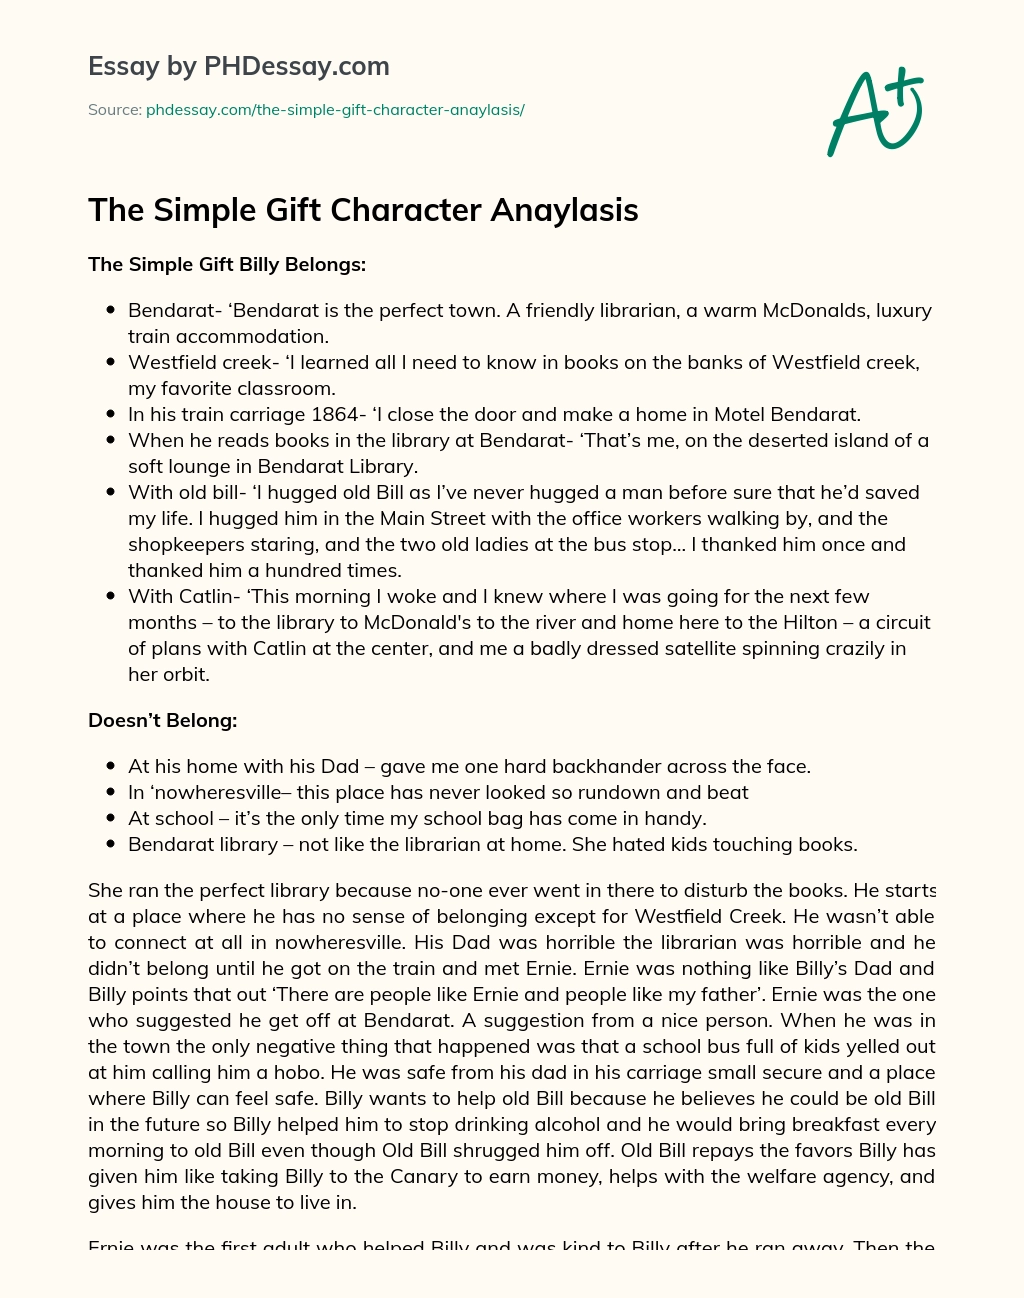 The Simple Gift Character Anaylasis essay